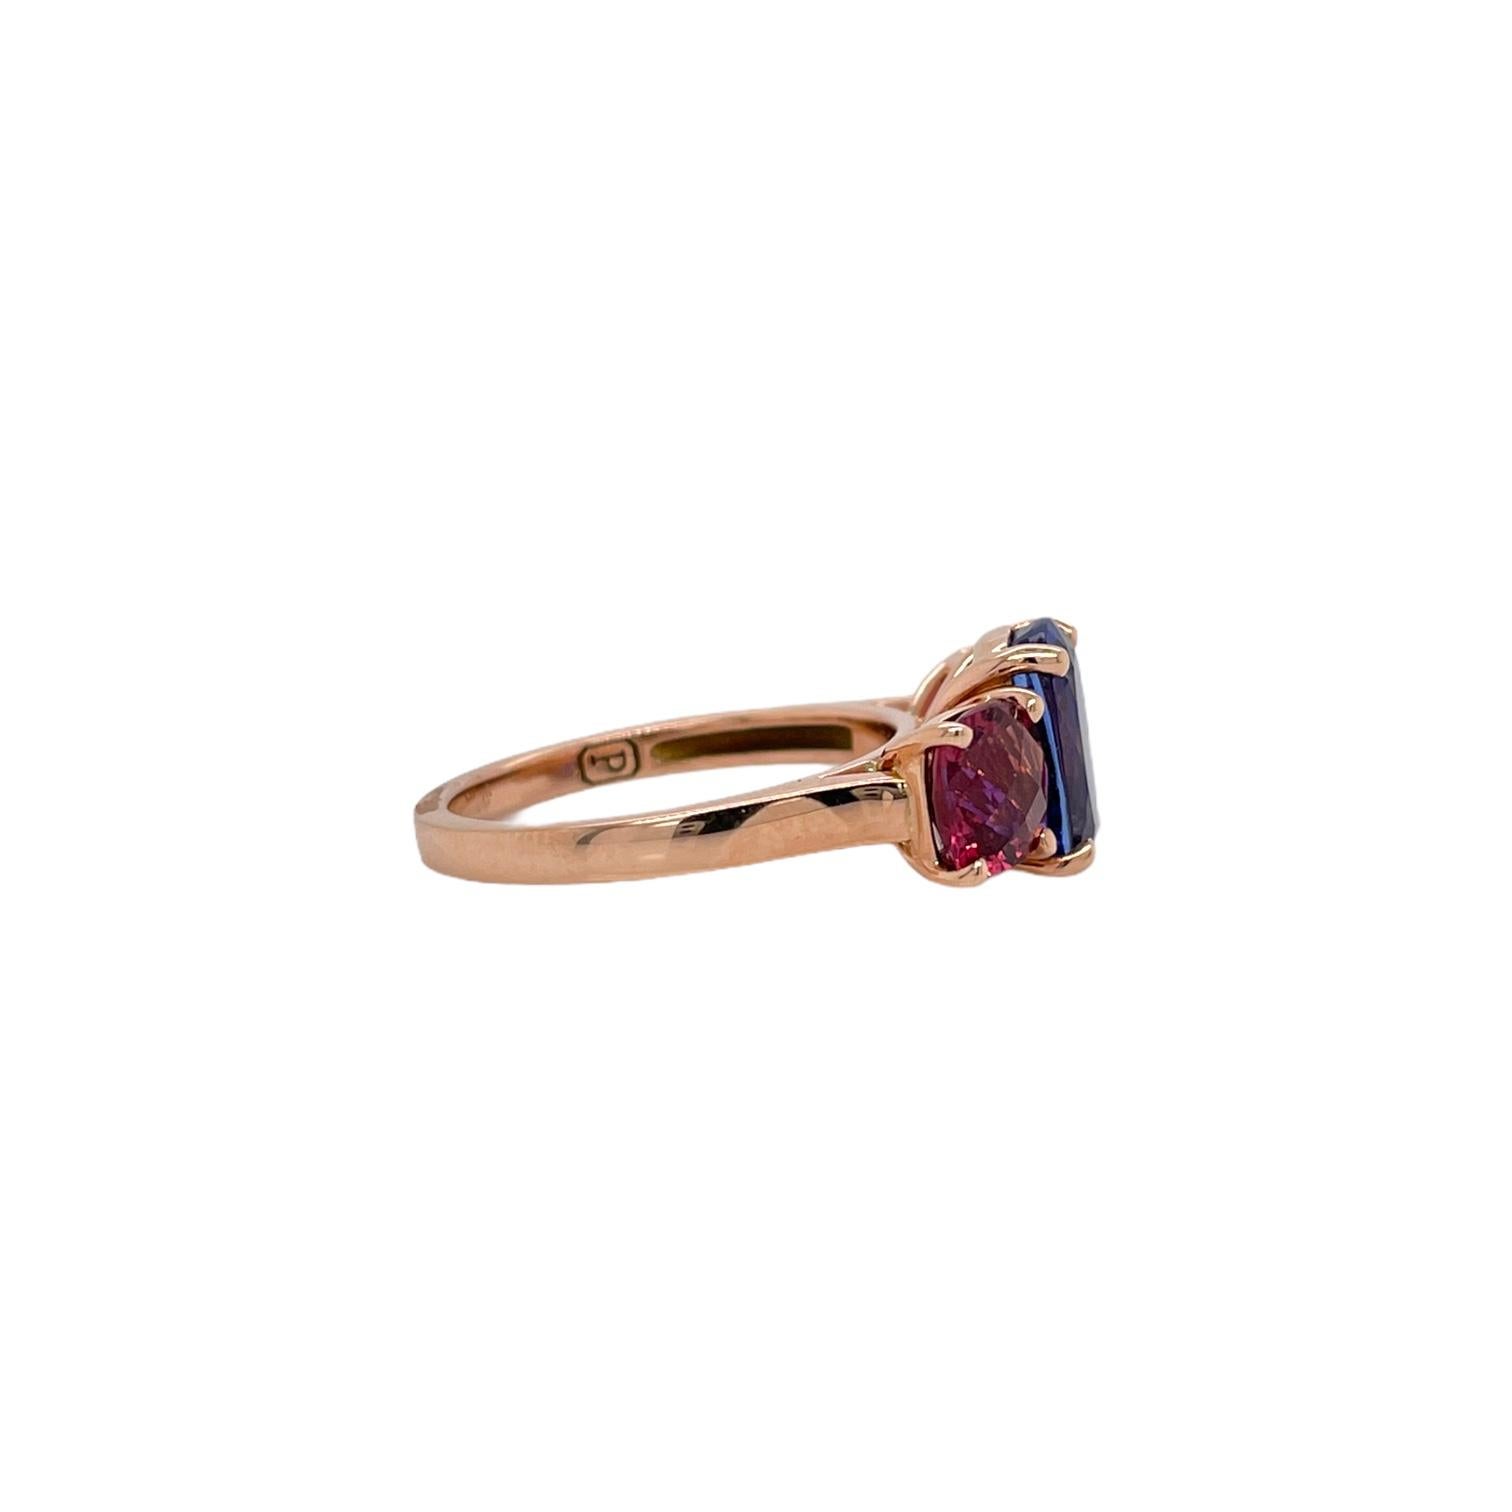 Modern tanzanite and pink tourmaline three stone ring in 14k rose gold. Ring contains 1 finely cut cushion shape tanzanite 3.06ct and 2 precisely matched square cushion shape pink tourmalines 1.85tcw. Stones are mounted in a basket style prong